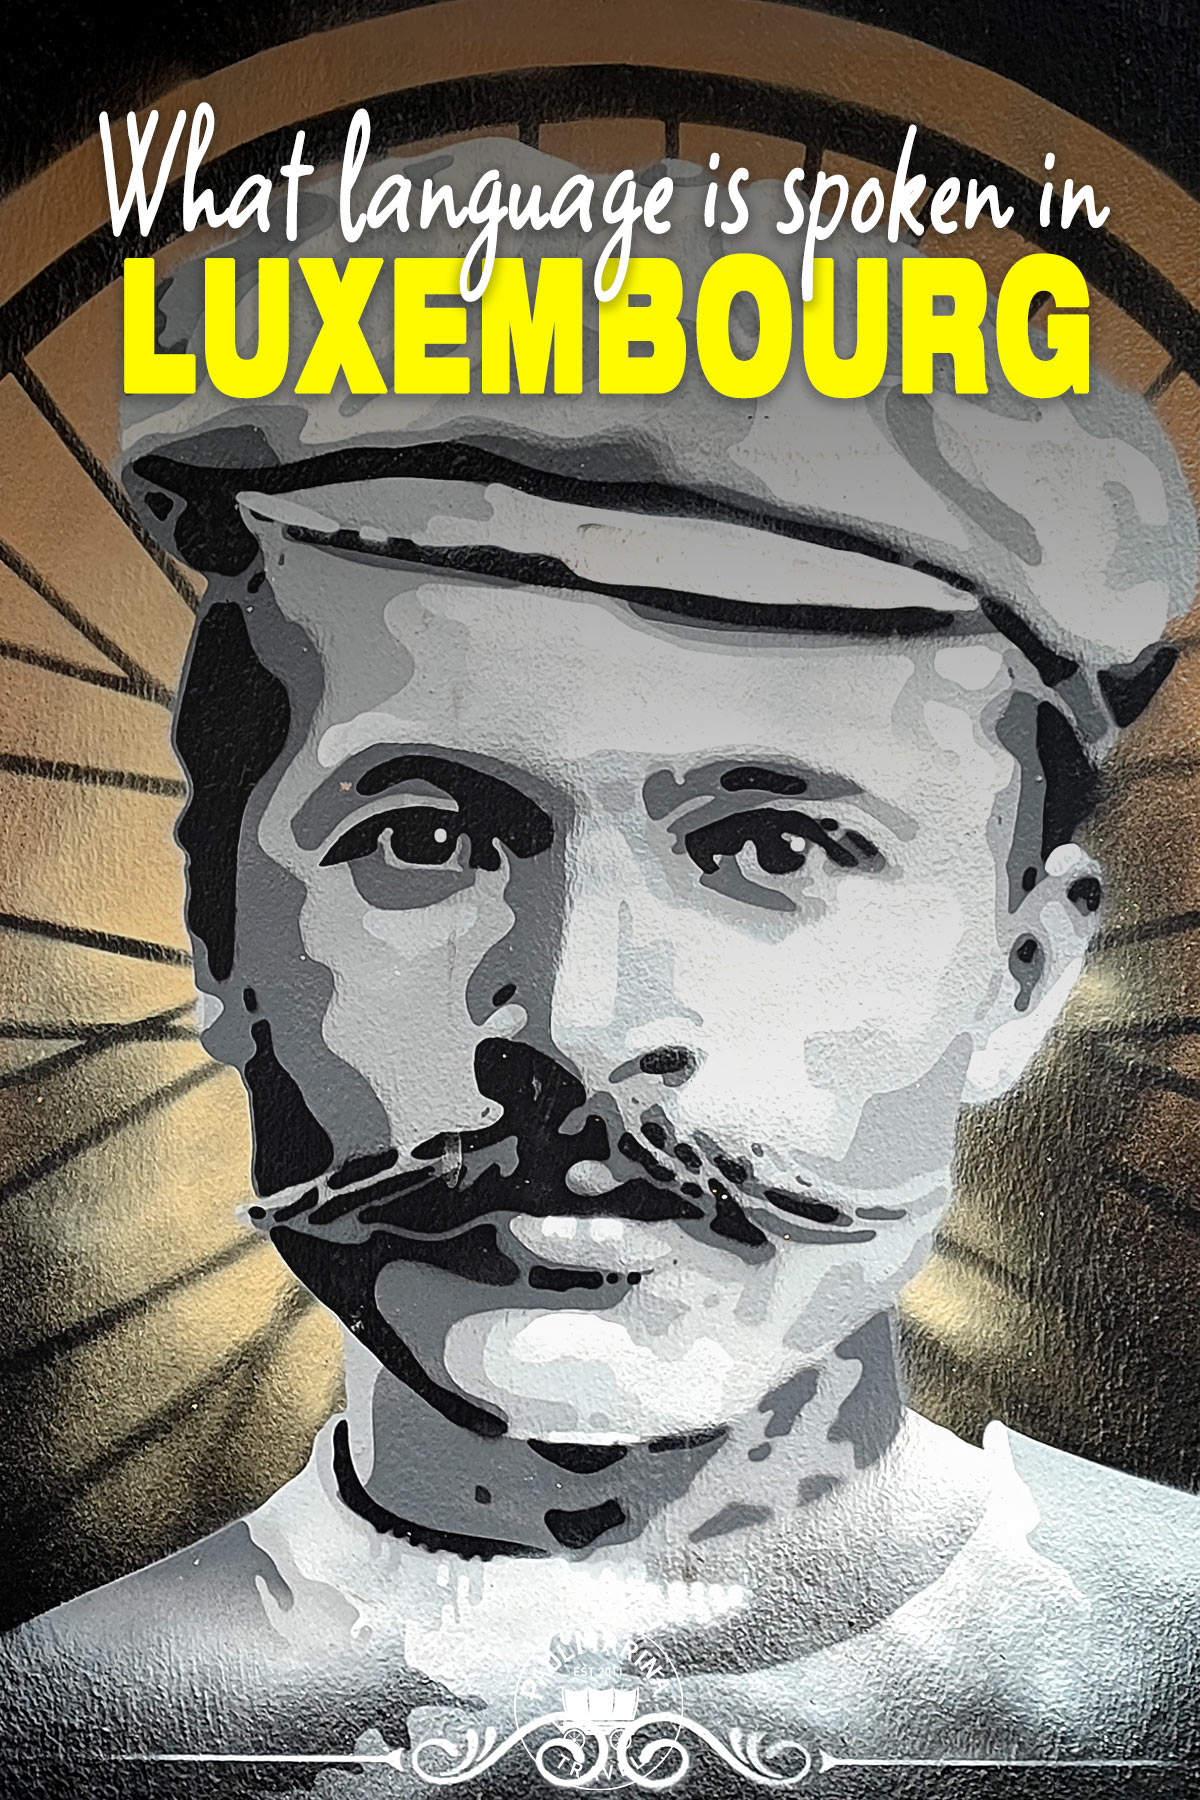 What language is spoken in Luxembourg?